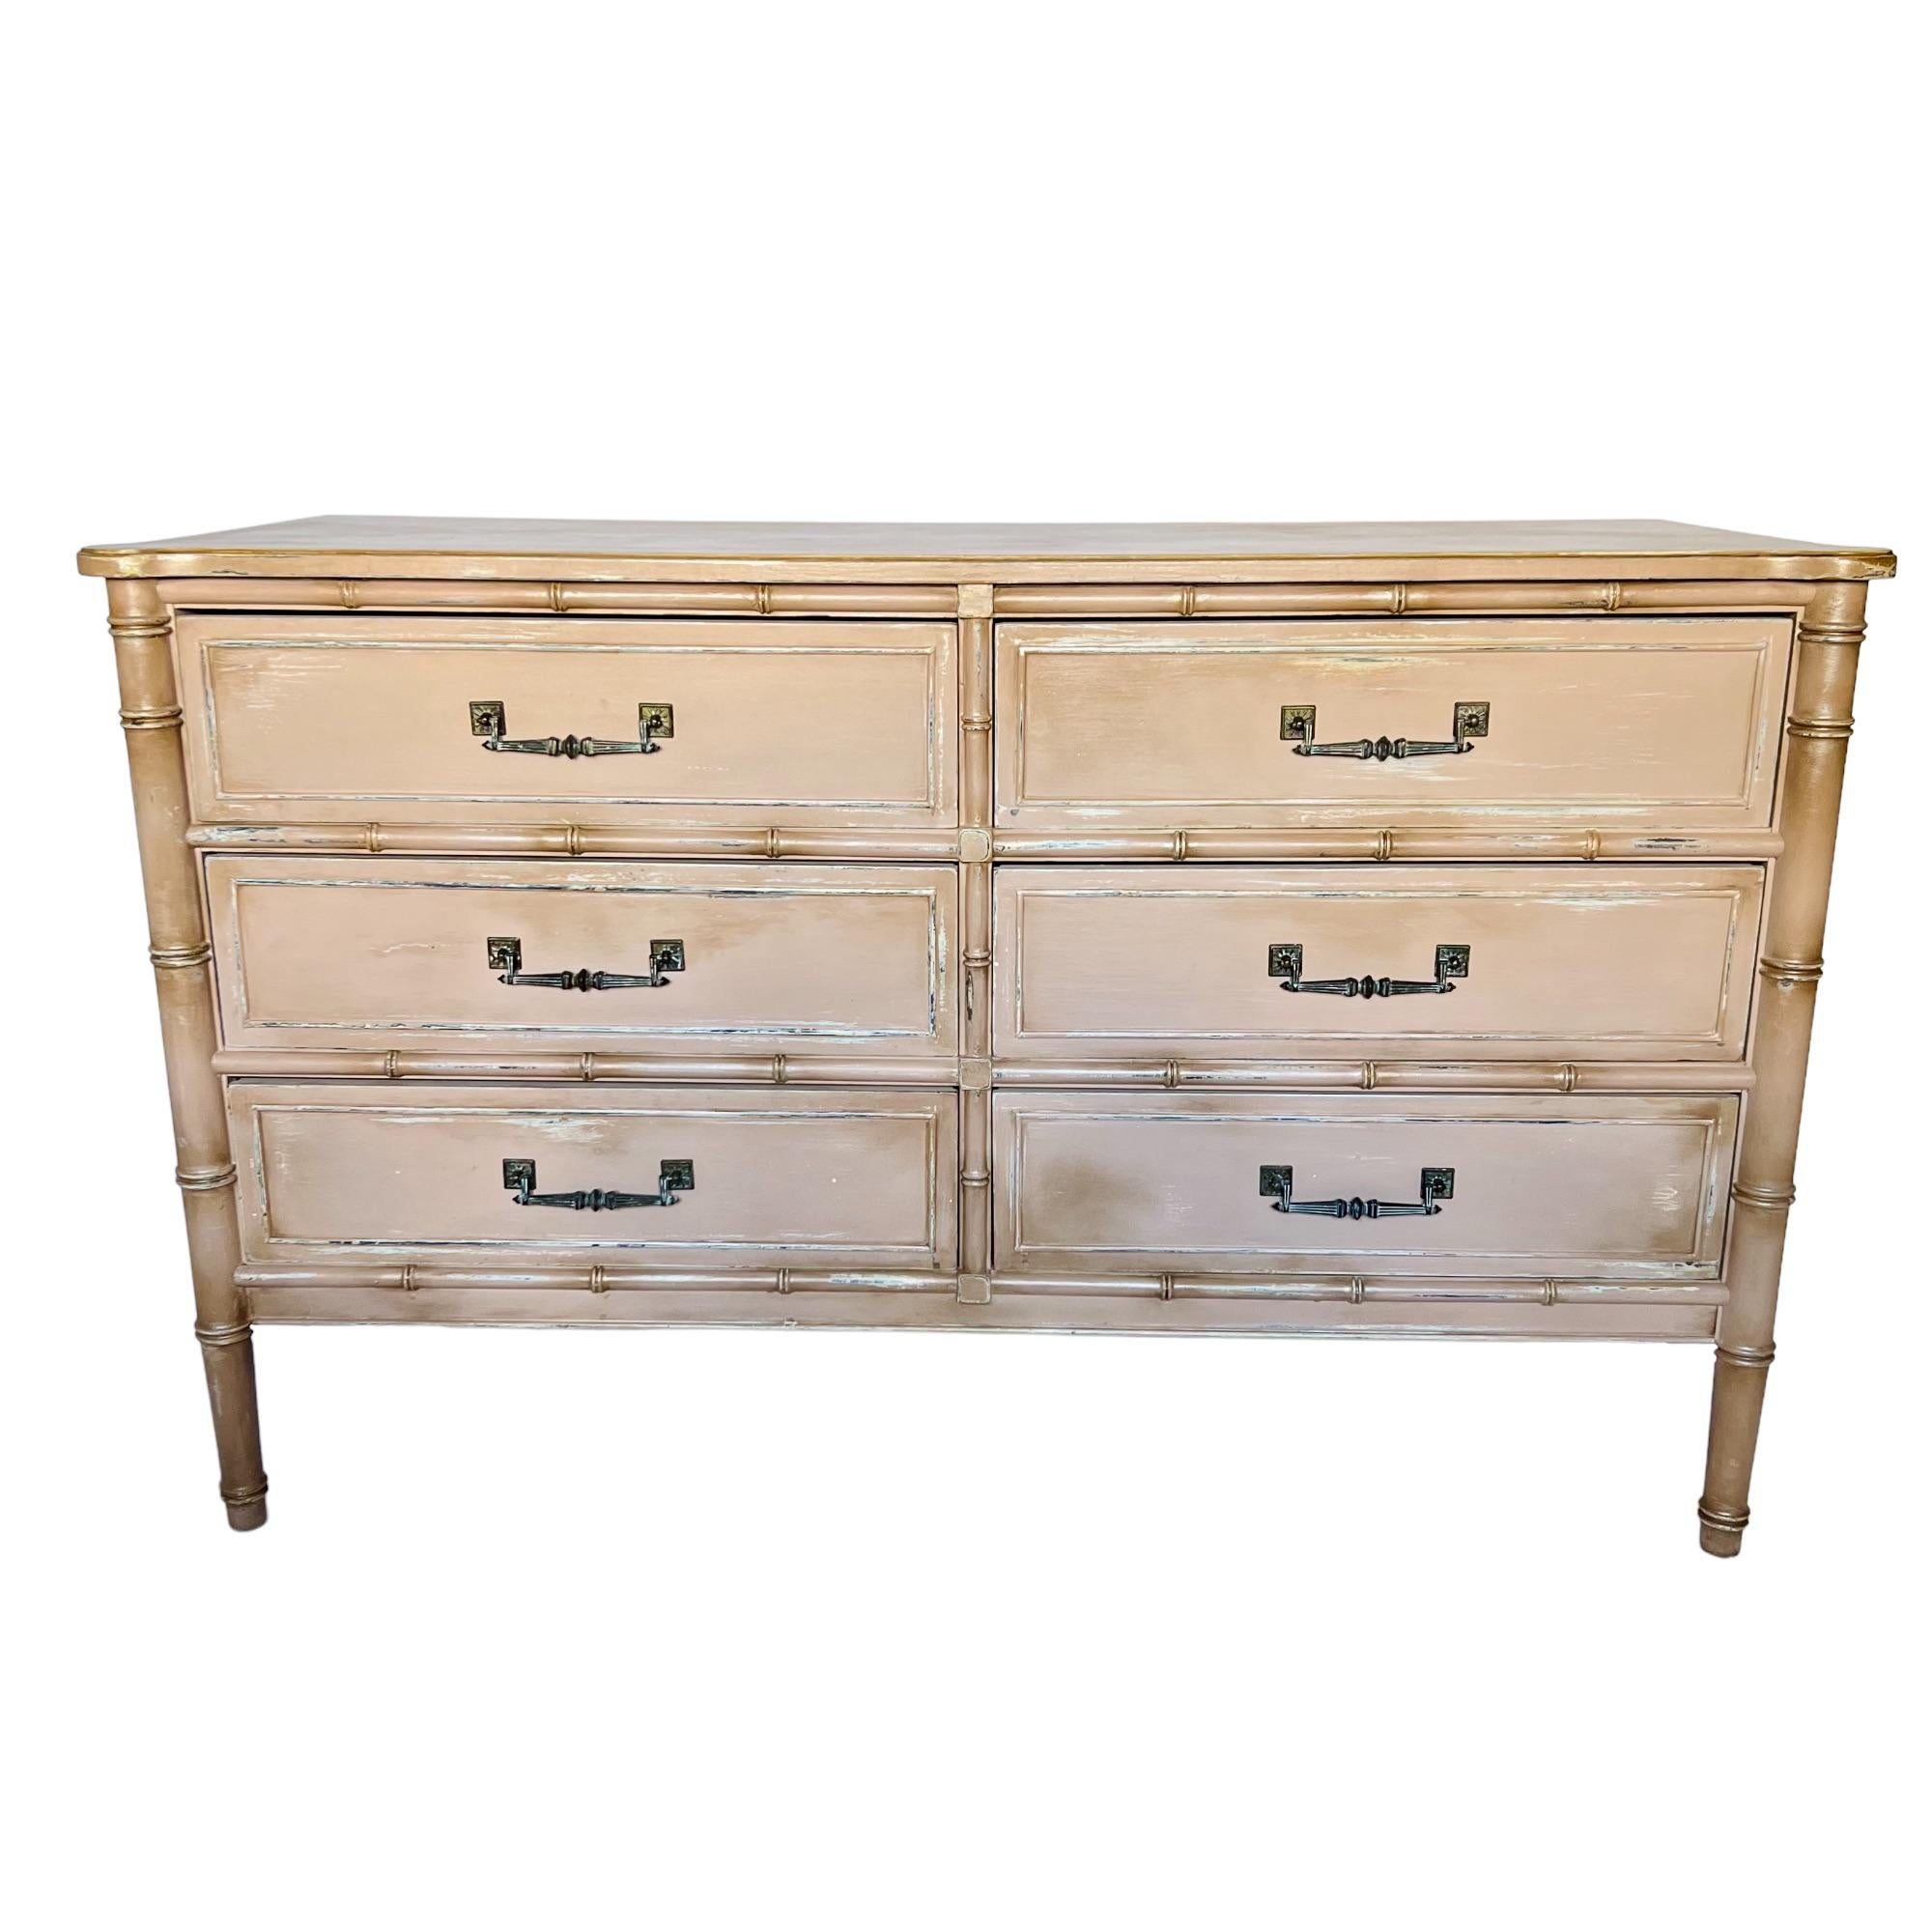 This vintage Henry Link Palm Beach Regency faux bamboo dresser has been custom refinished in a distressed satin light dusty pink with dark wax details and pearlescent and gold highlights. It features six drawers adorned with bronze handles and lined